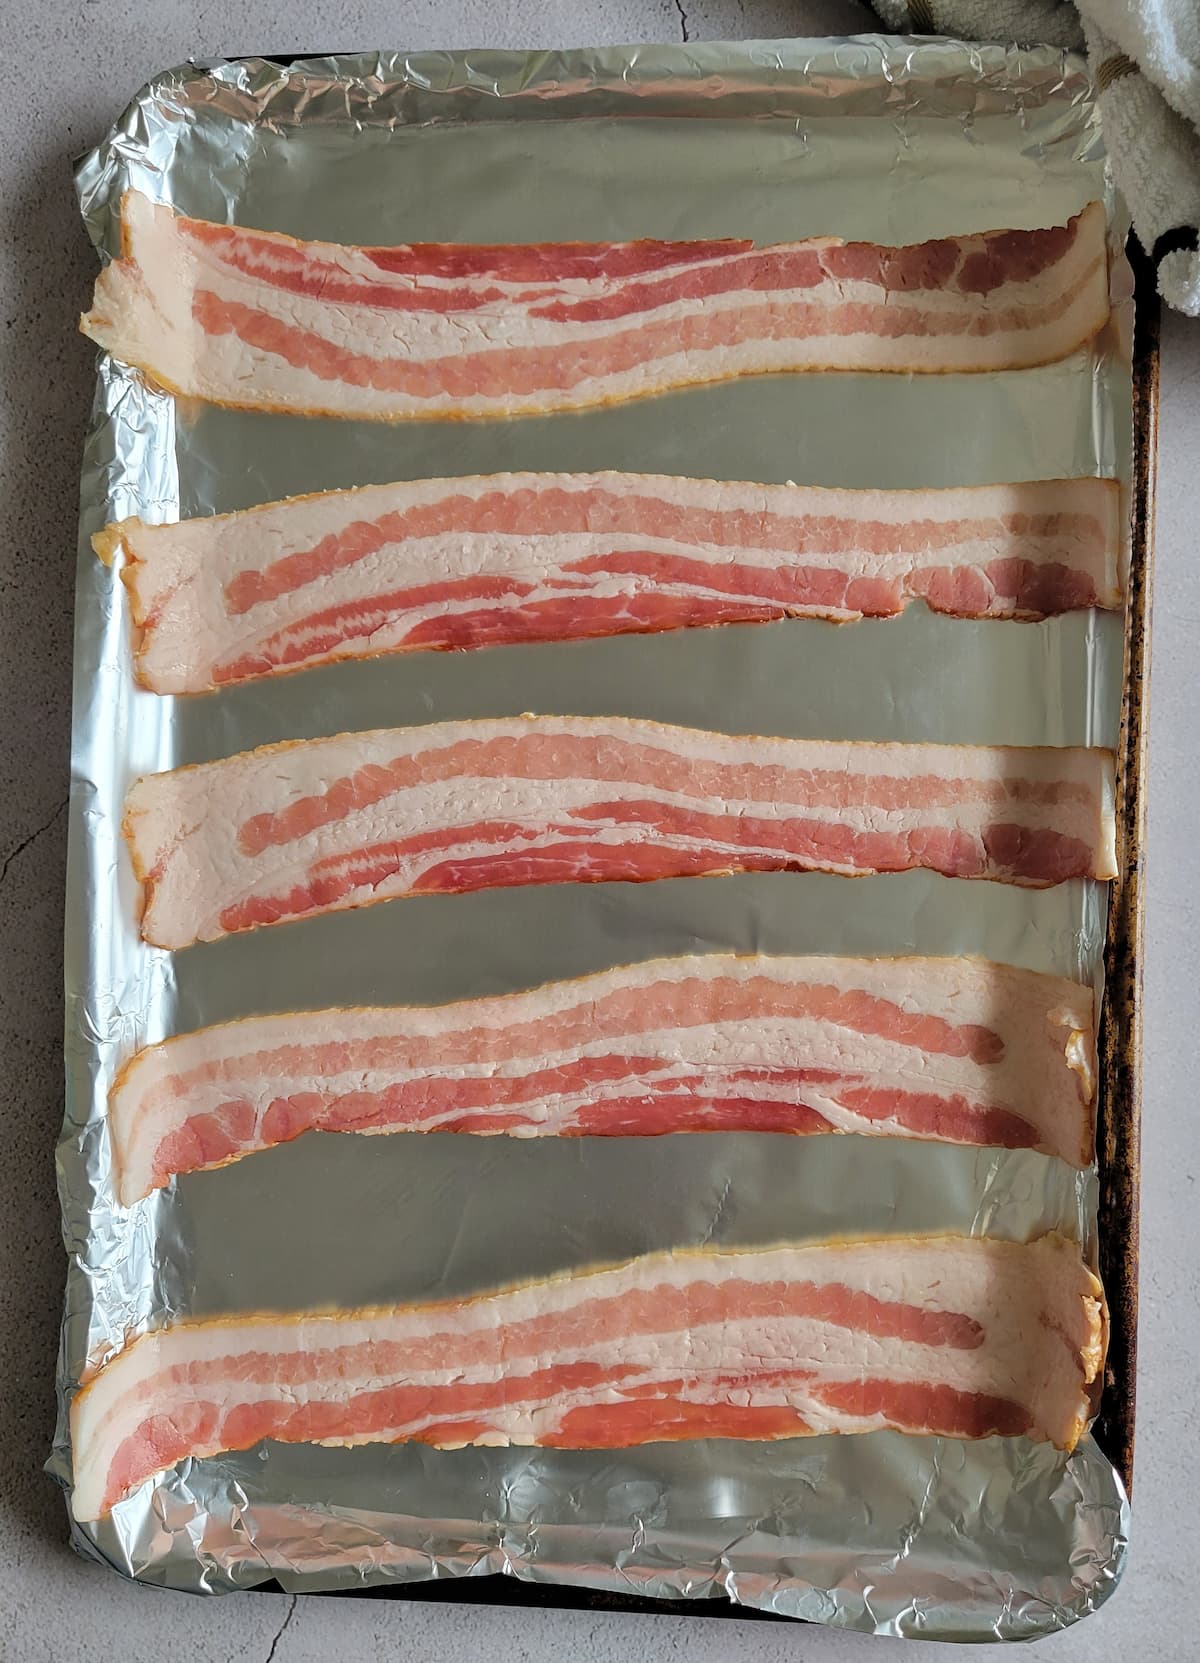 5 strips of raw bacon on a foil lined baking sheet